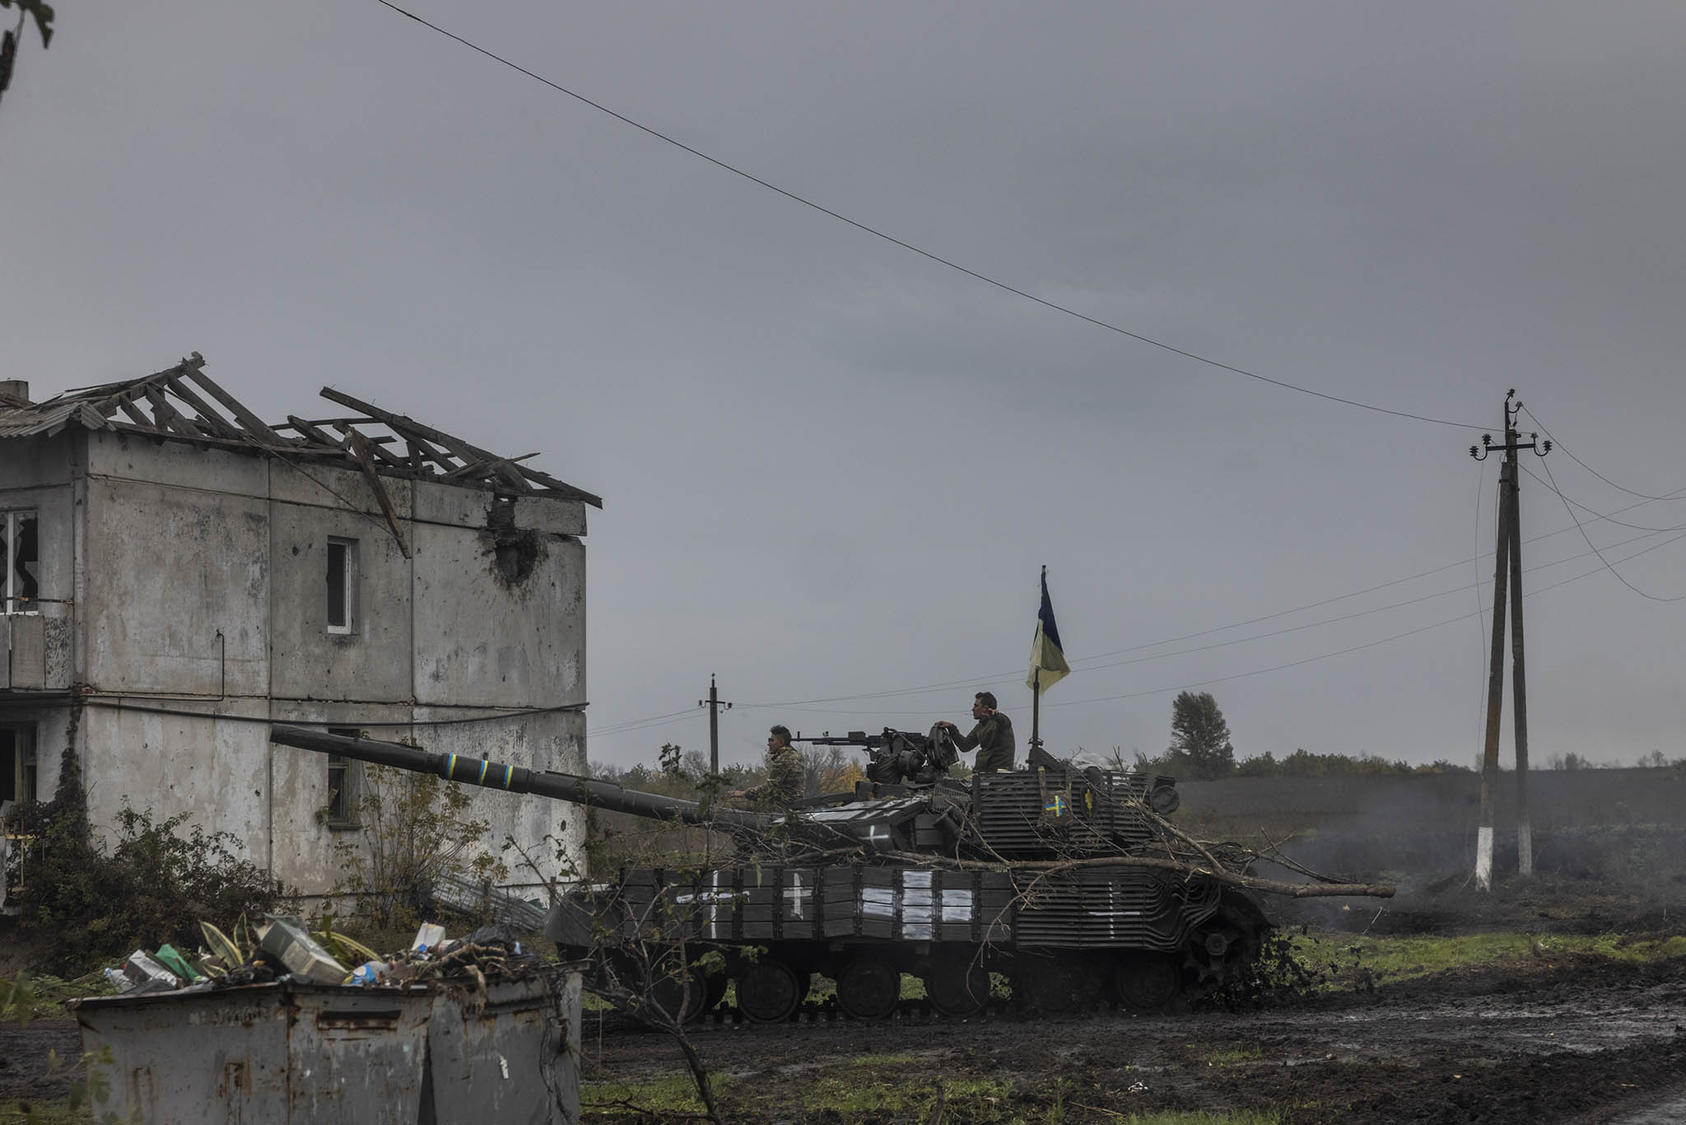 A Ukrainian tank in the recently recaptured area north of the town of Lyman, in the Donetsk Region, Ukraine, Oct. 2, 2022. Amid Ukraine’s swift counteroffensives, Putin has raised the specter of nuclear confrontation. (Ivor Prickett/The New York Times)